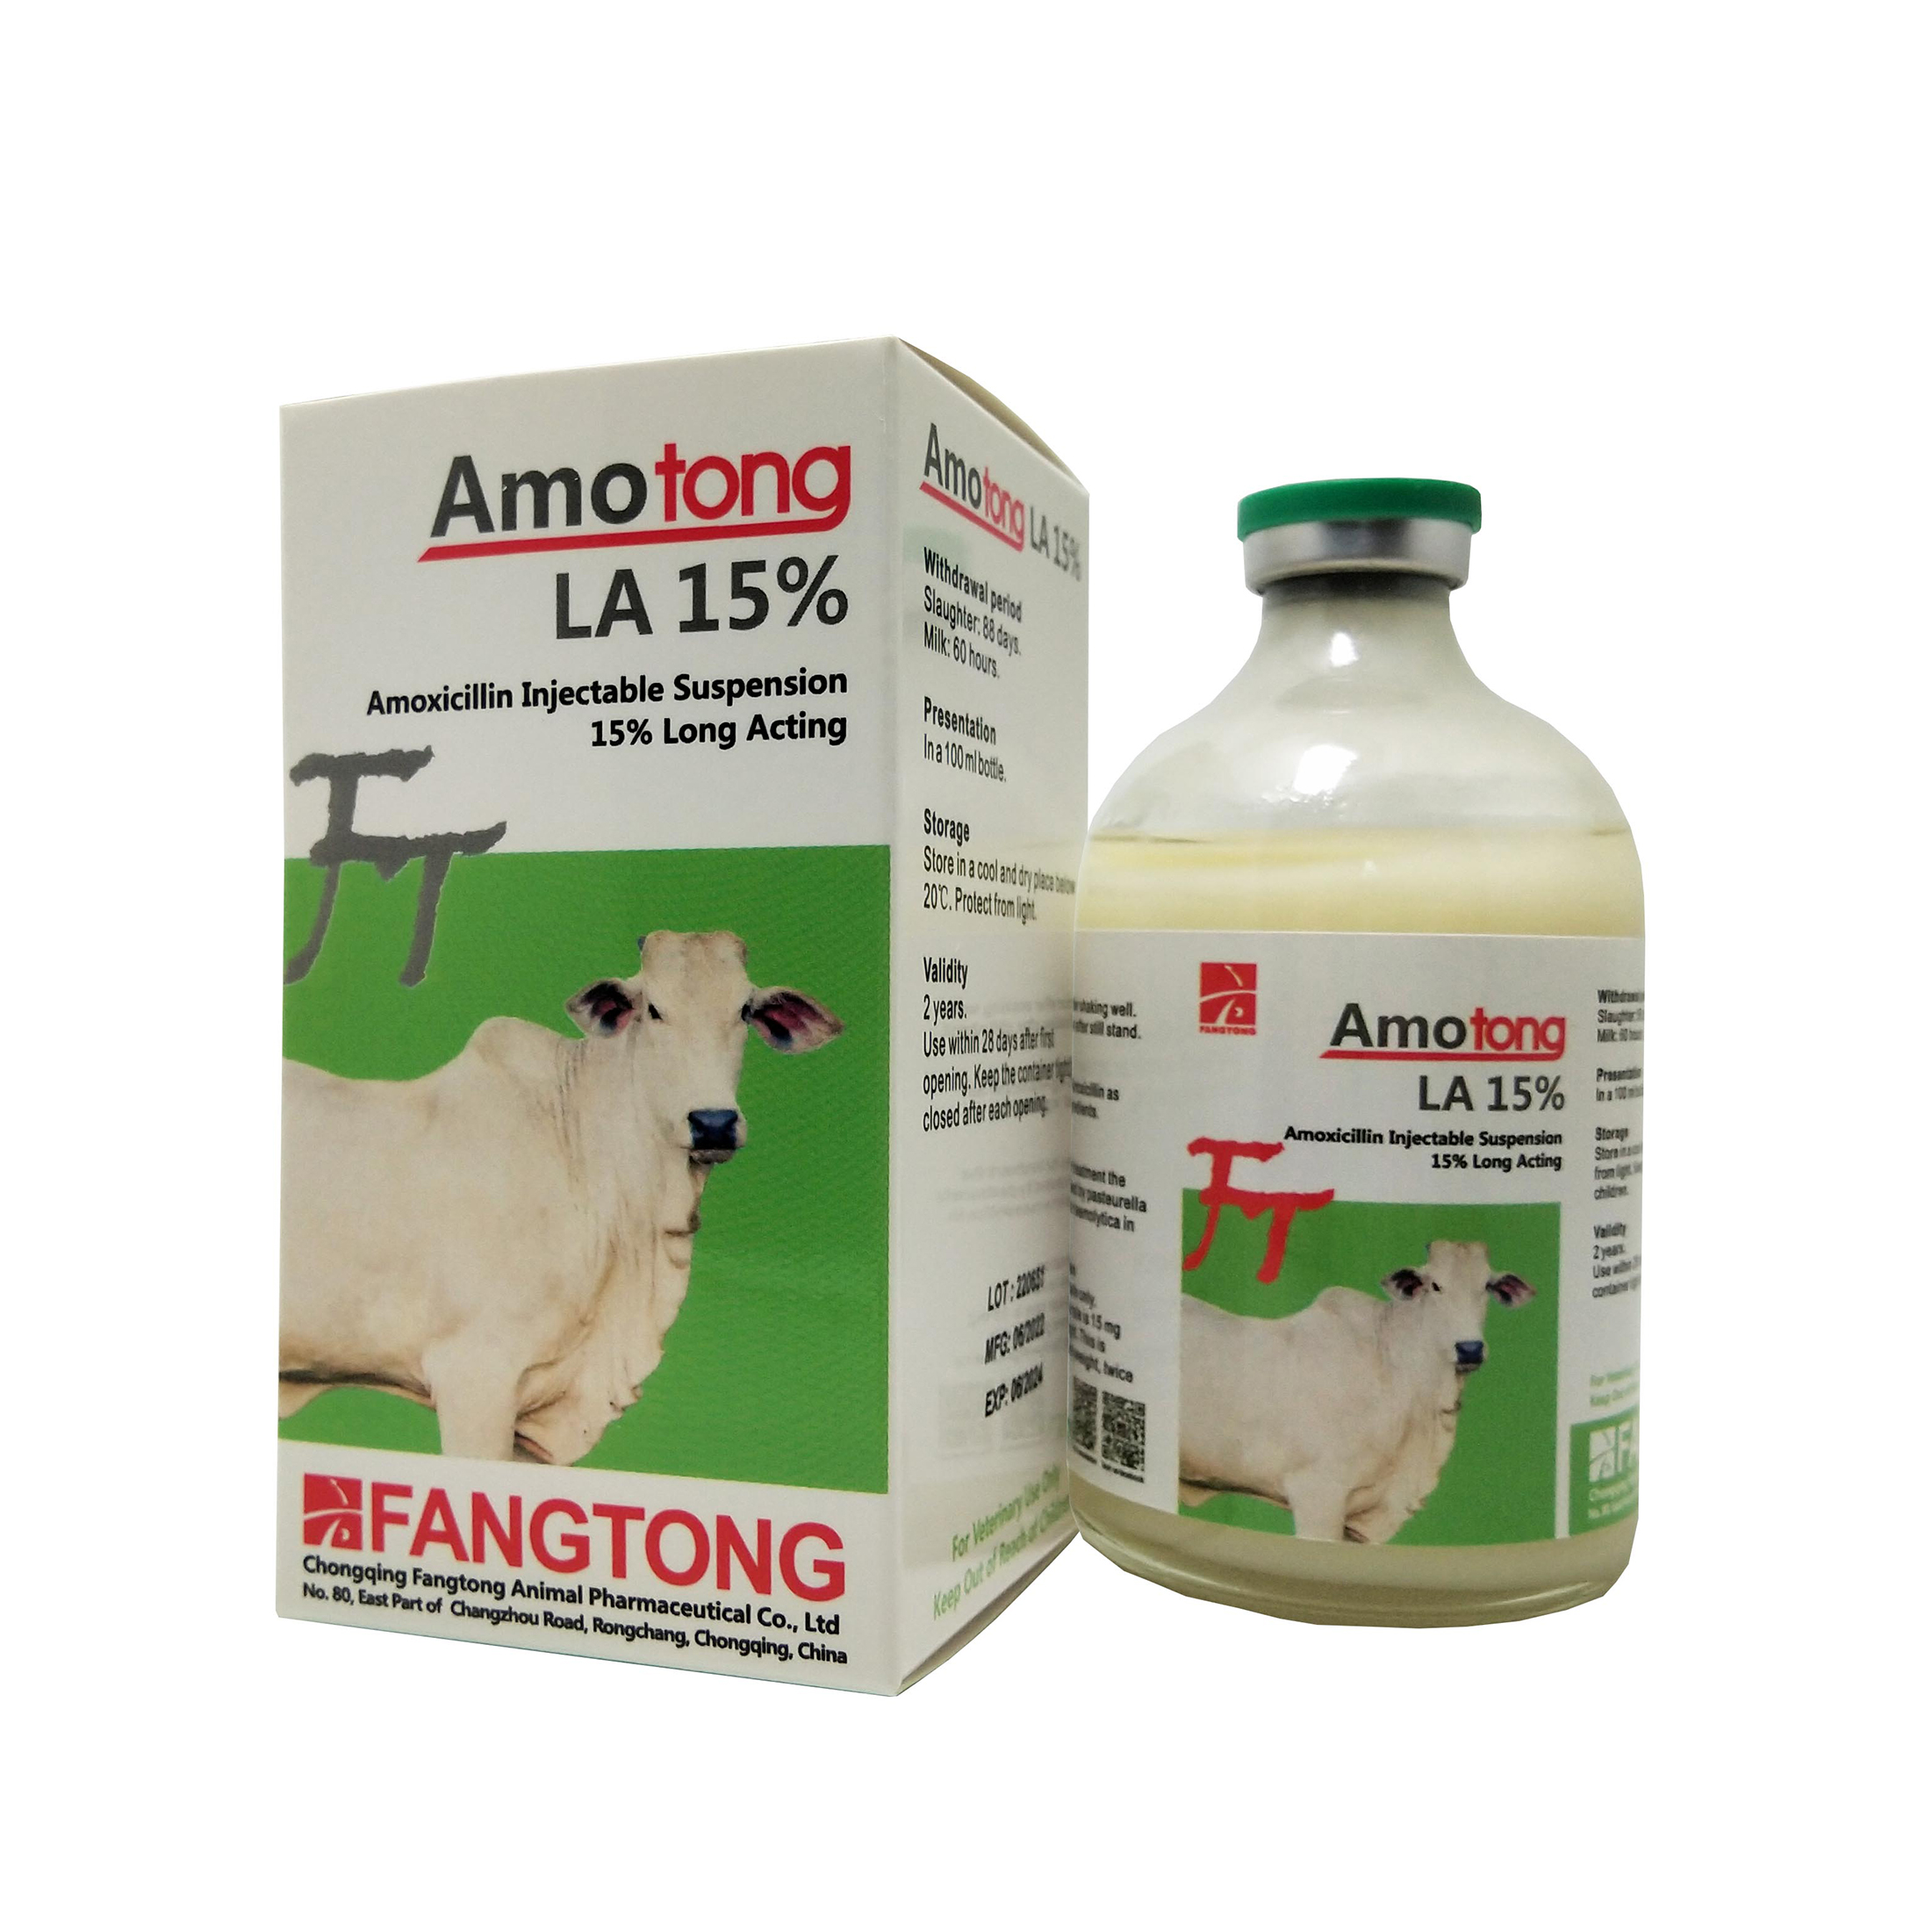 Amoxicillin Injectable Suspension 15% Long Acting Featured Image